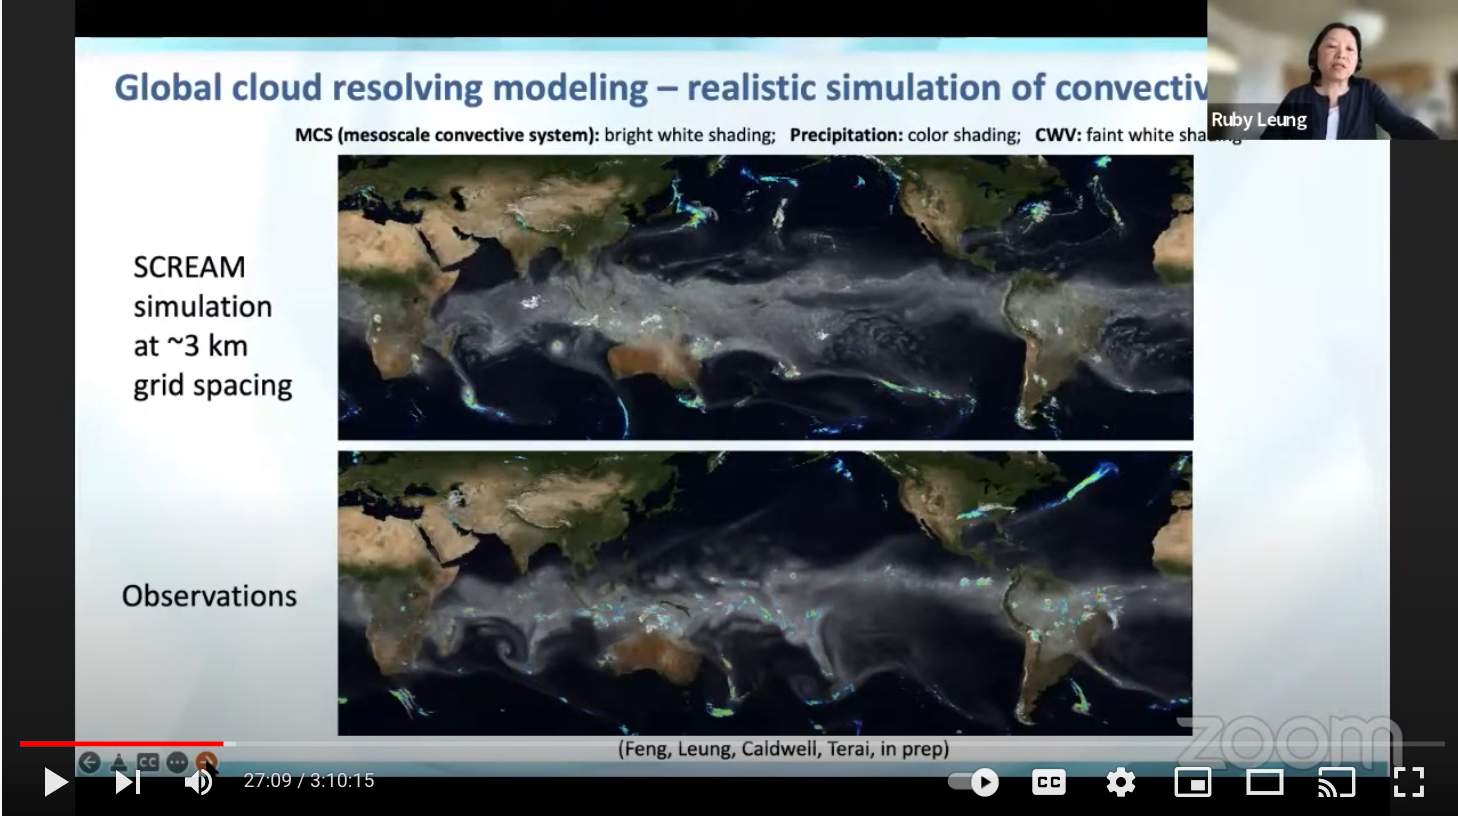 Ruby Leung presents at “The Future of Climate Modelling” WCRP Workshop